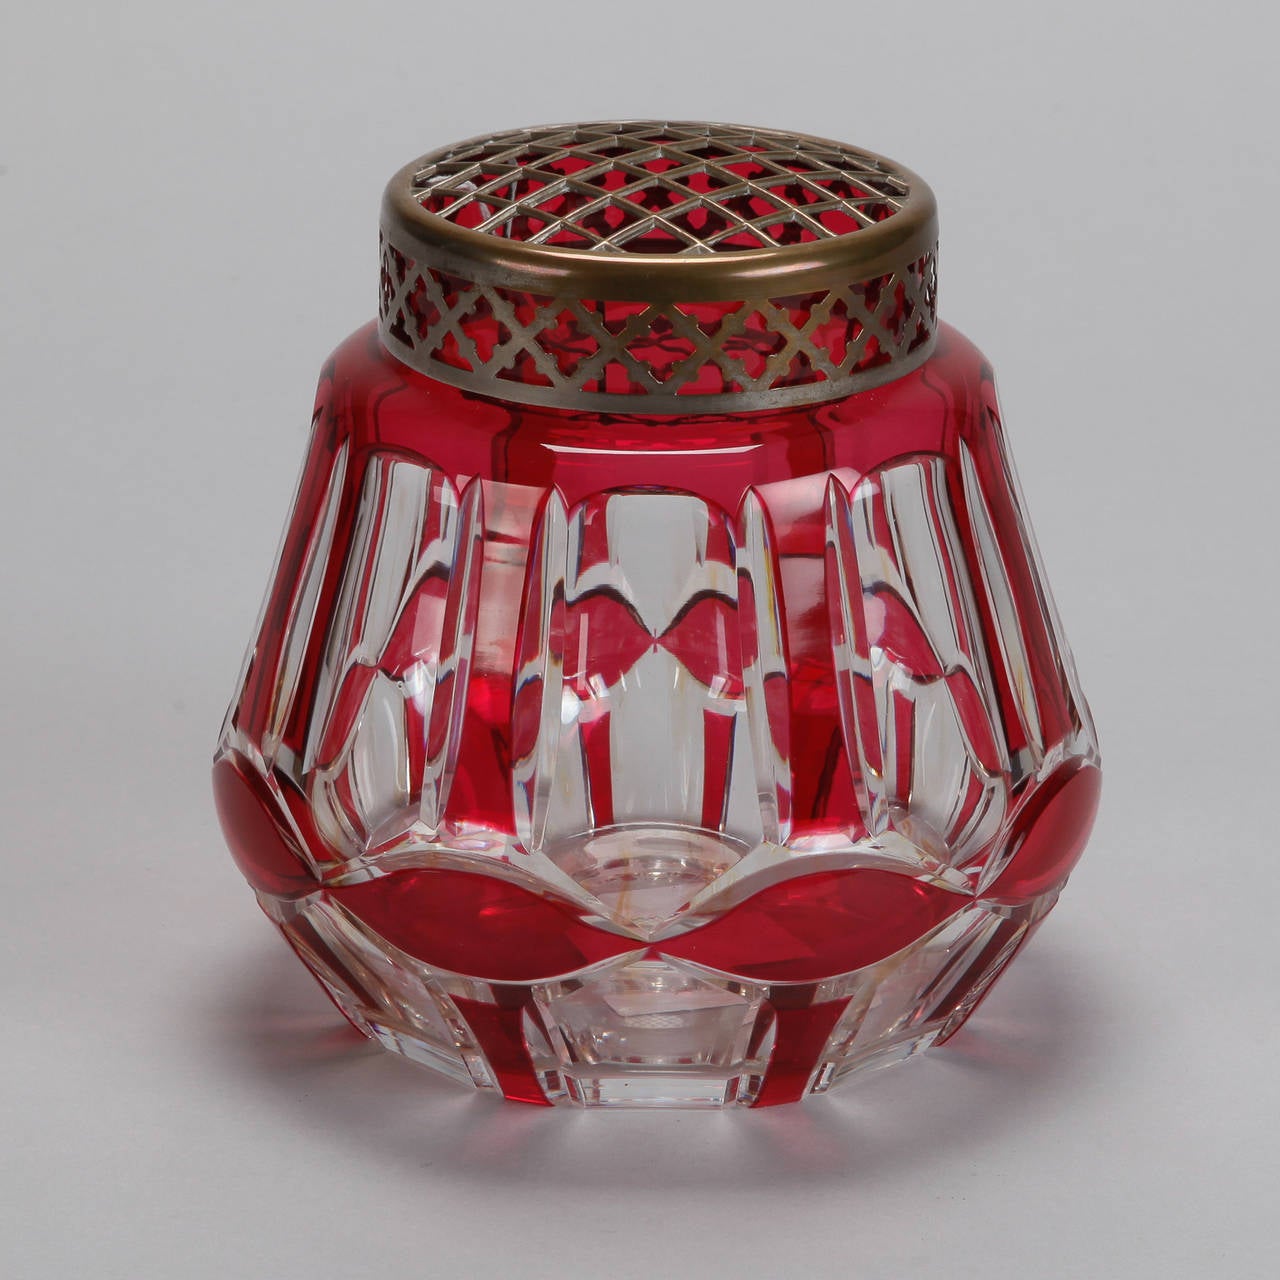 Circa 1900 ruby red and clear cut glass rose bowl by Belgian manufacturer Val Saint Lambert topped with brass flower frog.